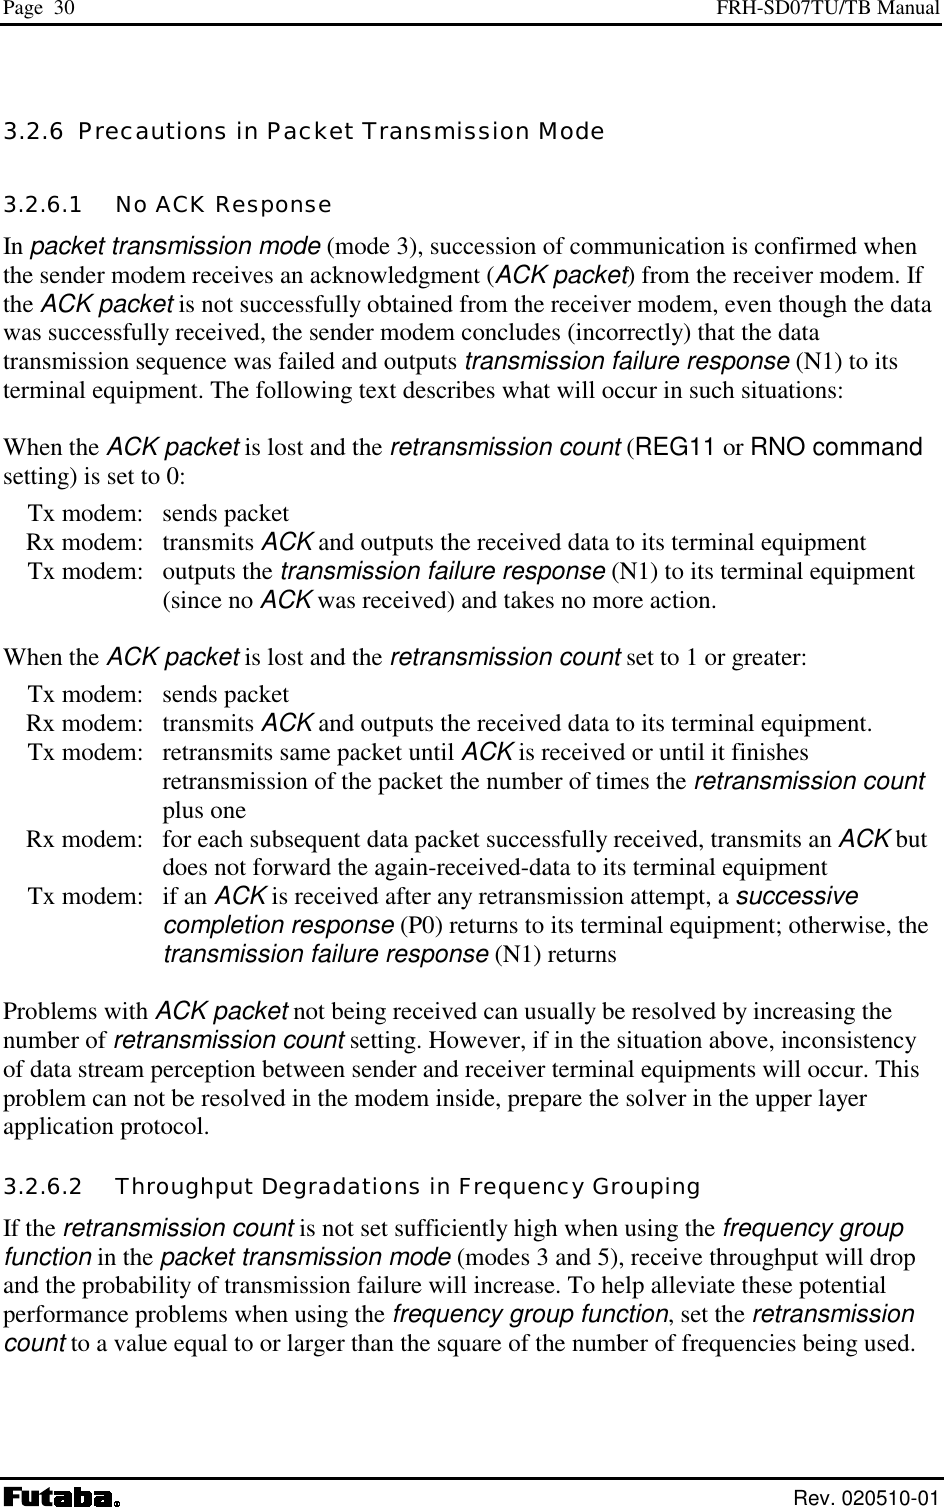 Page  30  FRH-SD07TU/TB Manual  Rev. 020510-01 3.2.6  Precautions in Packet Transmission Mode 3.2.6.1   No ACK Response In packet transmission mode (mode 3), succession of communication is confirmed when the sender modem receives an acknowledgment (ACK packet) from the receiver modem. If the ACK packet is not successfully obtained from the receiver modem, even though the data was successfully received, the sender modem concludes (incorrectly) that the data transmission sequence was failed and outputs transmission failure response (N1) to its terminal equipment. The following text describes what will occur in such situations:  When the ACK packet is lost and the retransmission count (REG11 or RNO command setting) is set to 0:   Tx modem:  sends packet  Rx modem: transmits ACK and outputs the received data to its terminal equipment   Tx modem:  outputs the transmission failure response (N1) to its terminal equipment (since no ACK was received) and takes no more action.  When the ACK packet is lost and the retransmission count set to 1 or greater:   Tx modem:  sends packet  Rx modem: transmits ACK and outputs the received data to its terminal equipment.   Tx modem:  retransmits same packet until ACK is received or until it finishes retransmission of the packet the number of times the retransmission count plus one   Rx modem:  for each subsequent data packet successfully received, transmits an ACK but does not forward the again-received-data to its terminal equipment   Tx modem:  if an ACK is received after any retransmission attempt, a successive completion response (P0) returns to its terminal equipment; otherwise, the transmission failure response (N1) returns  Problems with ACK packet not being received can usually be resolved by increasing the number of retransmission count setting. However, if in the situation above, inconsistency of data stream perception between sender and receiver terminal equipments will occur. This problem can not be resolved in the modem inside, prepare the solver in the upper layer application protocol. 3.2.6.2   Throughput Degradations in Frequency Grouping If the retransmission count is not set sufficiently high when using the frequency group function in the packet transmission mode (modes 3 and 5), receive throughput will drop and the probability of transmission failure will increase. To help alleviate these potential performance problems when using the frequency group function, set the retransmission count to a value equal to or larger than the square of the number of frequencies being used.  